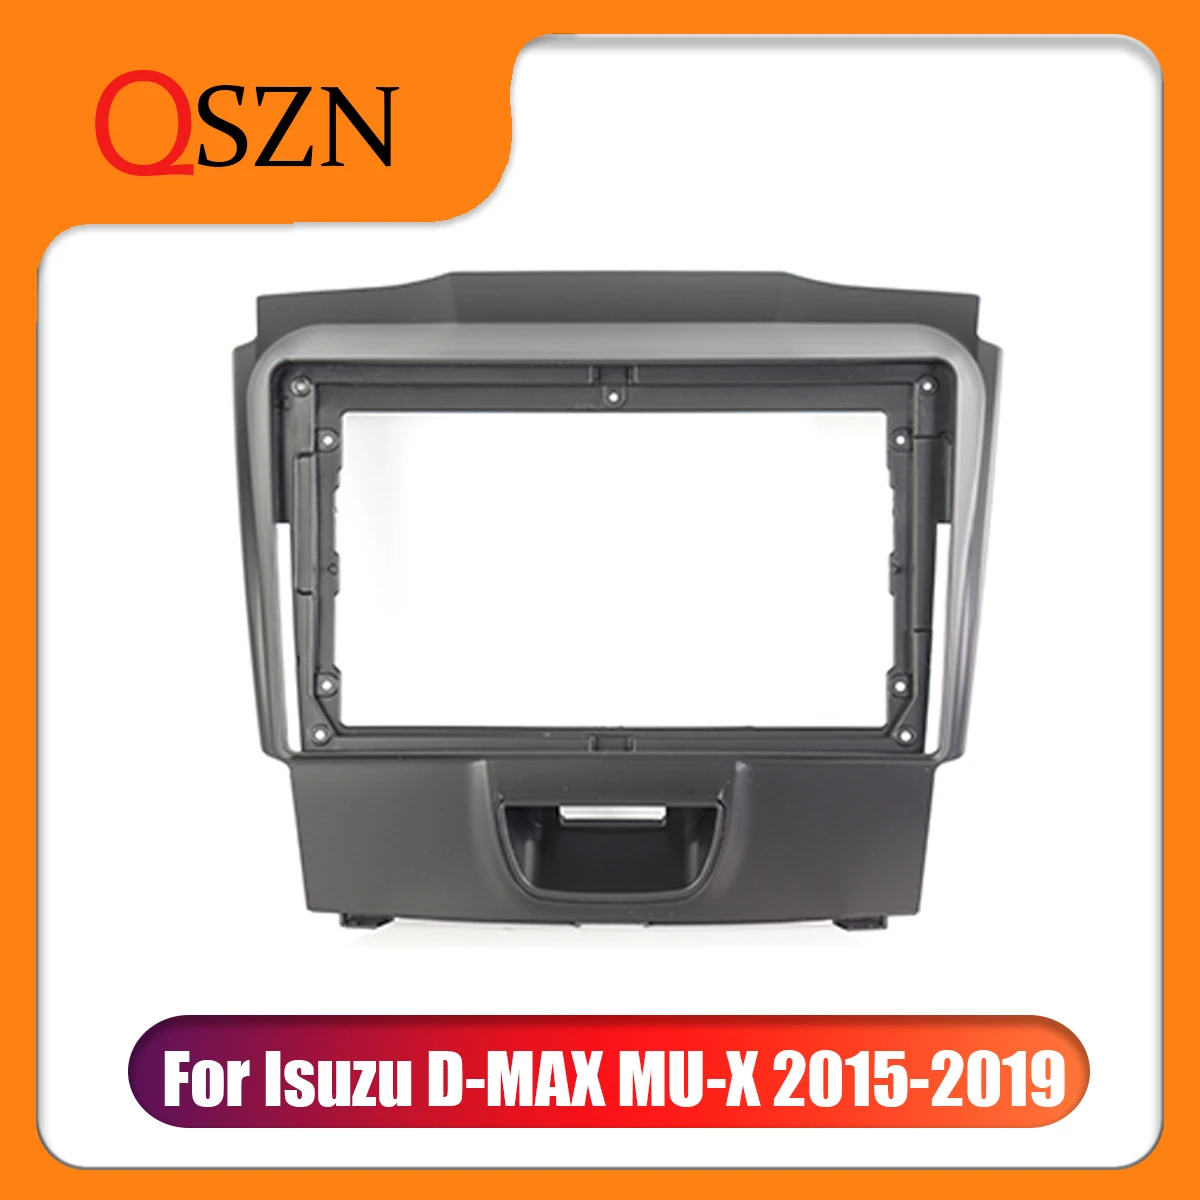 

9 Inch For Isuzu D-max MU-X 2015-2019 Car Radio Head Unit Android Stereo MP5 GPS Player 2 Din Panel Casing Frame Fascia Install